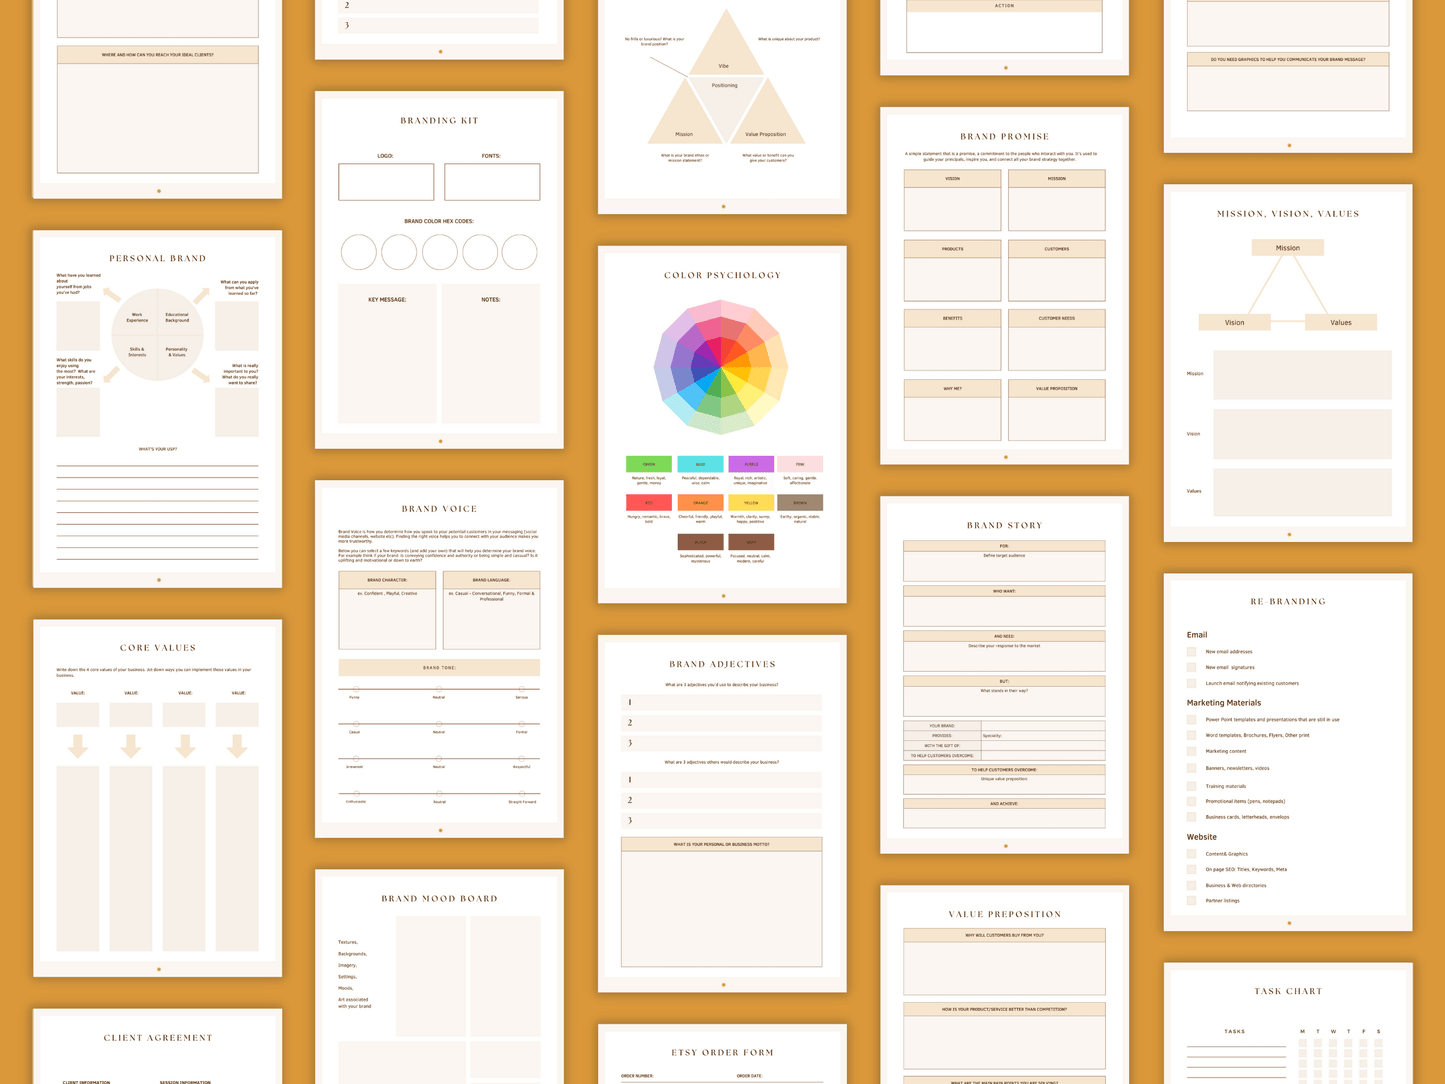 Aesthetic and boho branding done-for-you planner templates which include e.g. branding kit, brand adjective, brand mood board, etc. for content creators and business owners. It's editable in Canva.